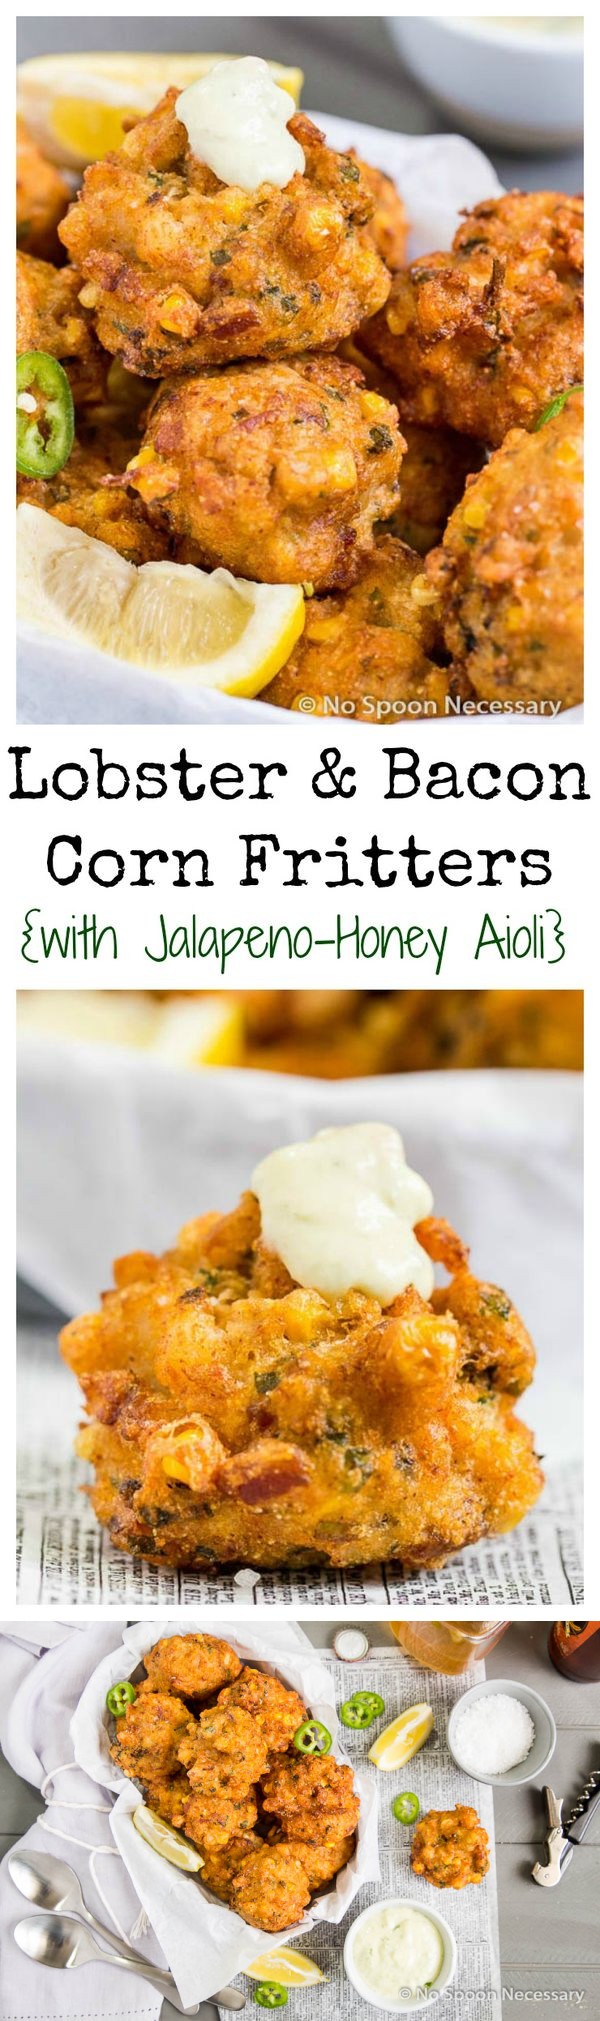 Lobster Corn Fritters (with Jalapeno-Honey Aioli